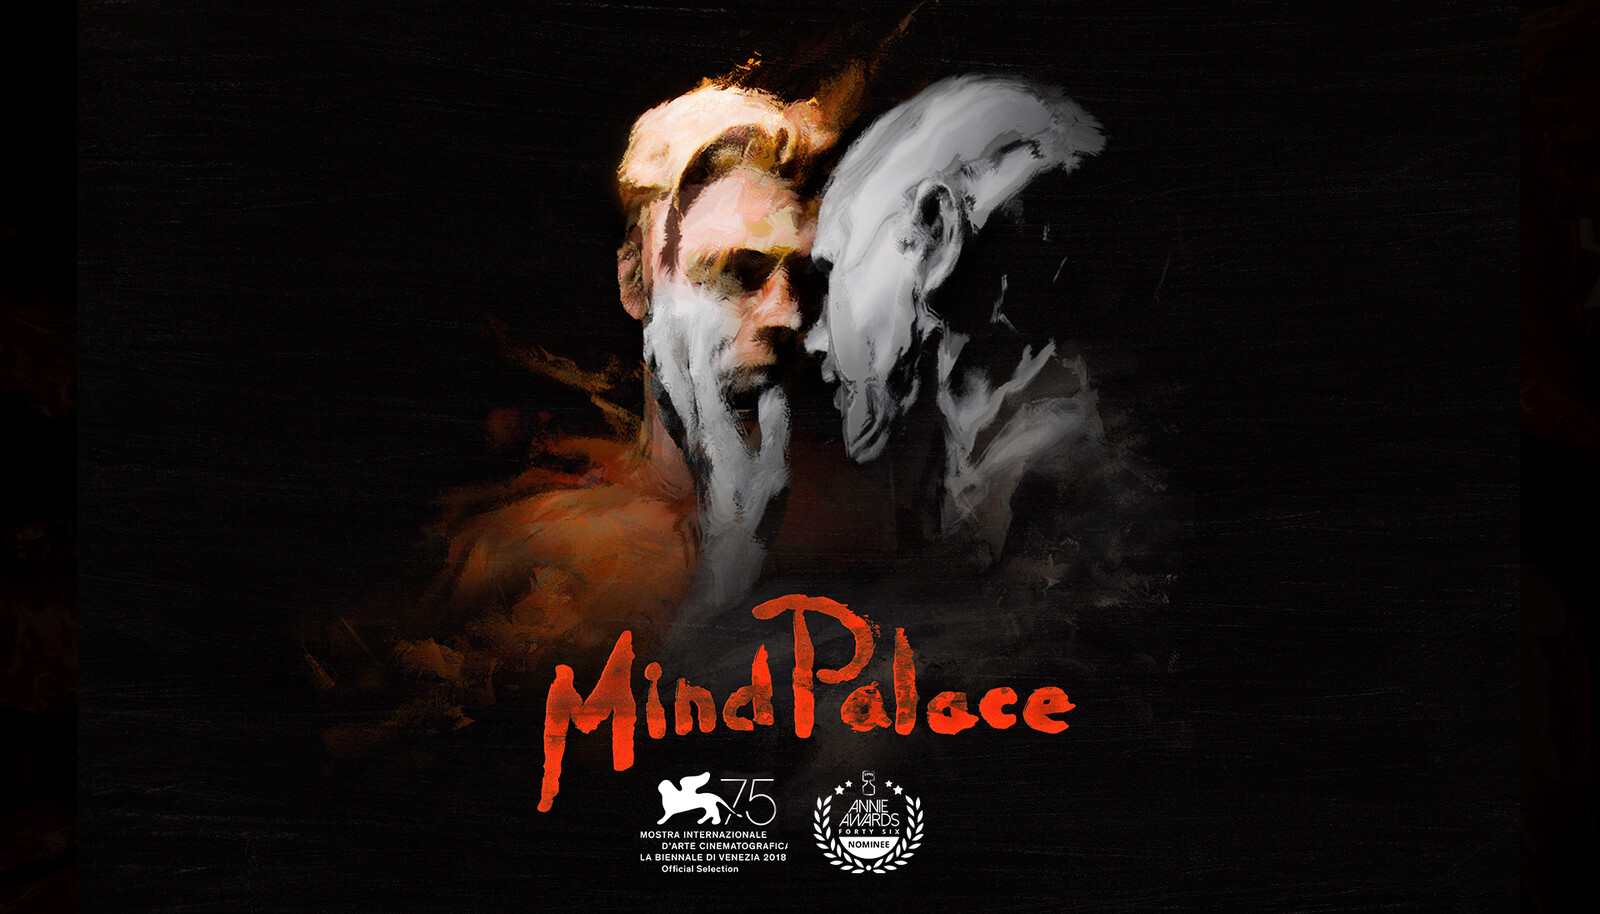 MindPalace VR realtime Experience